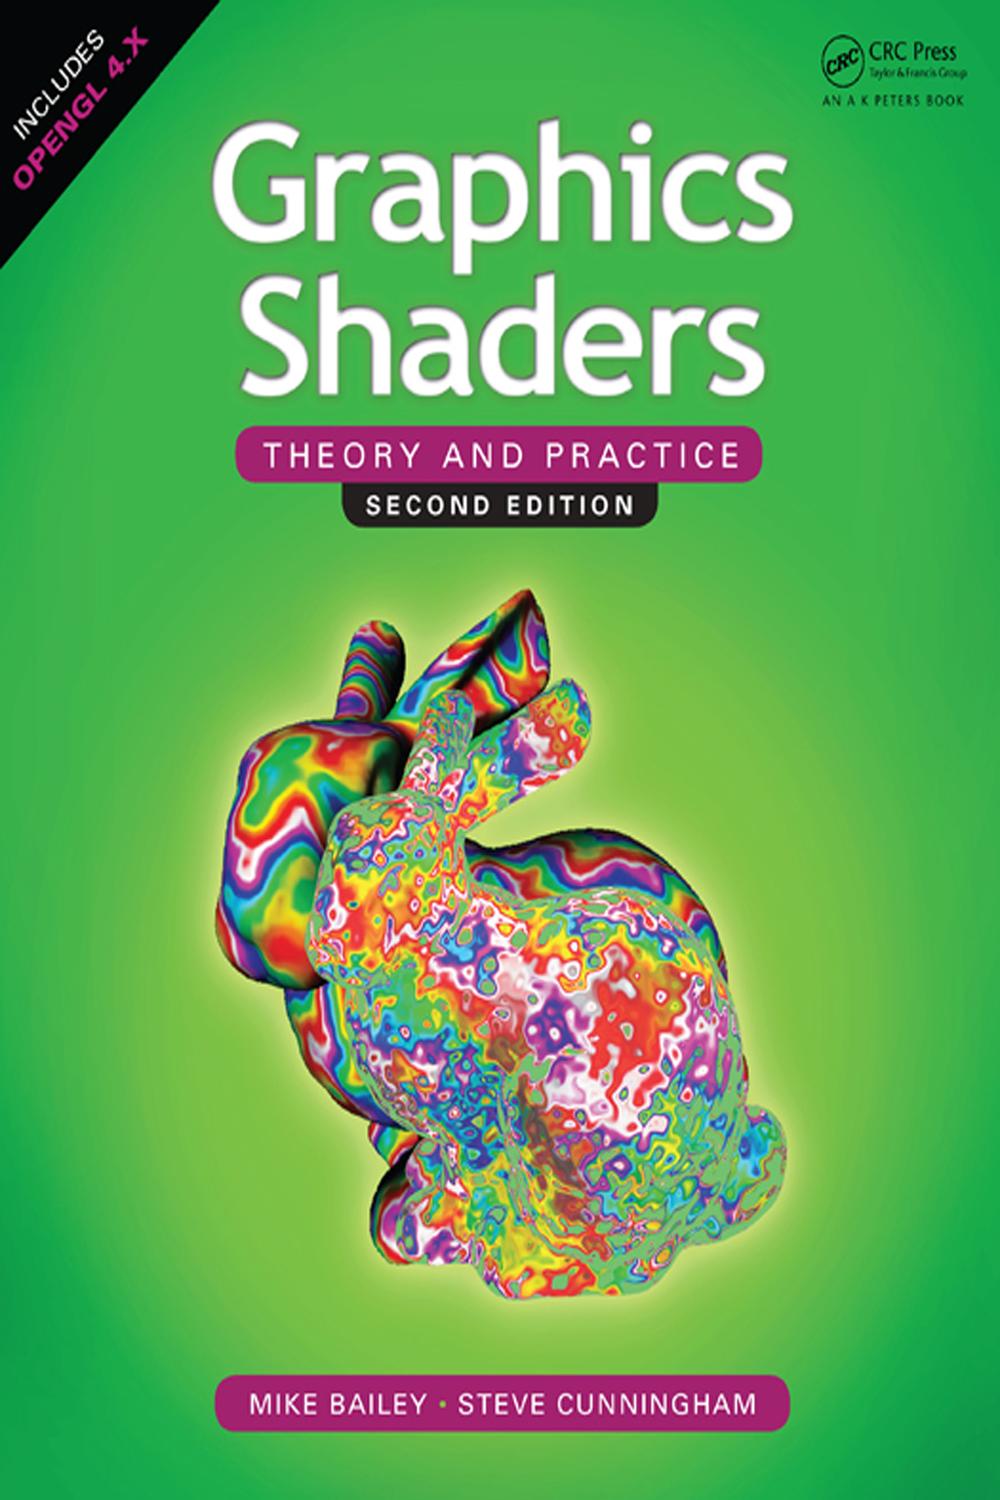 Graphics Shaders - Mike Bailey, Steve Cunningham